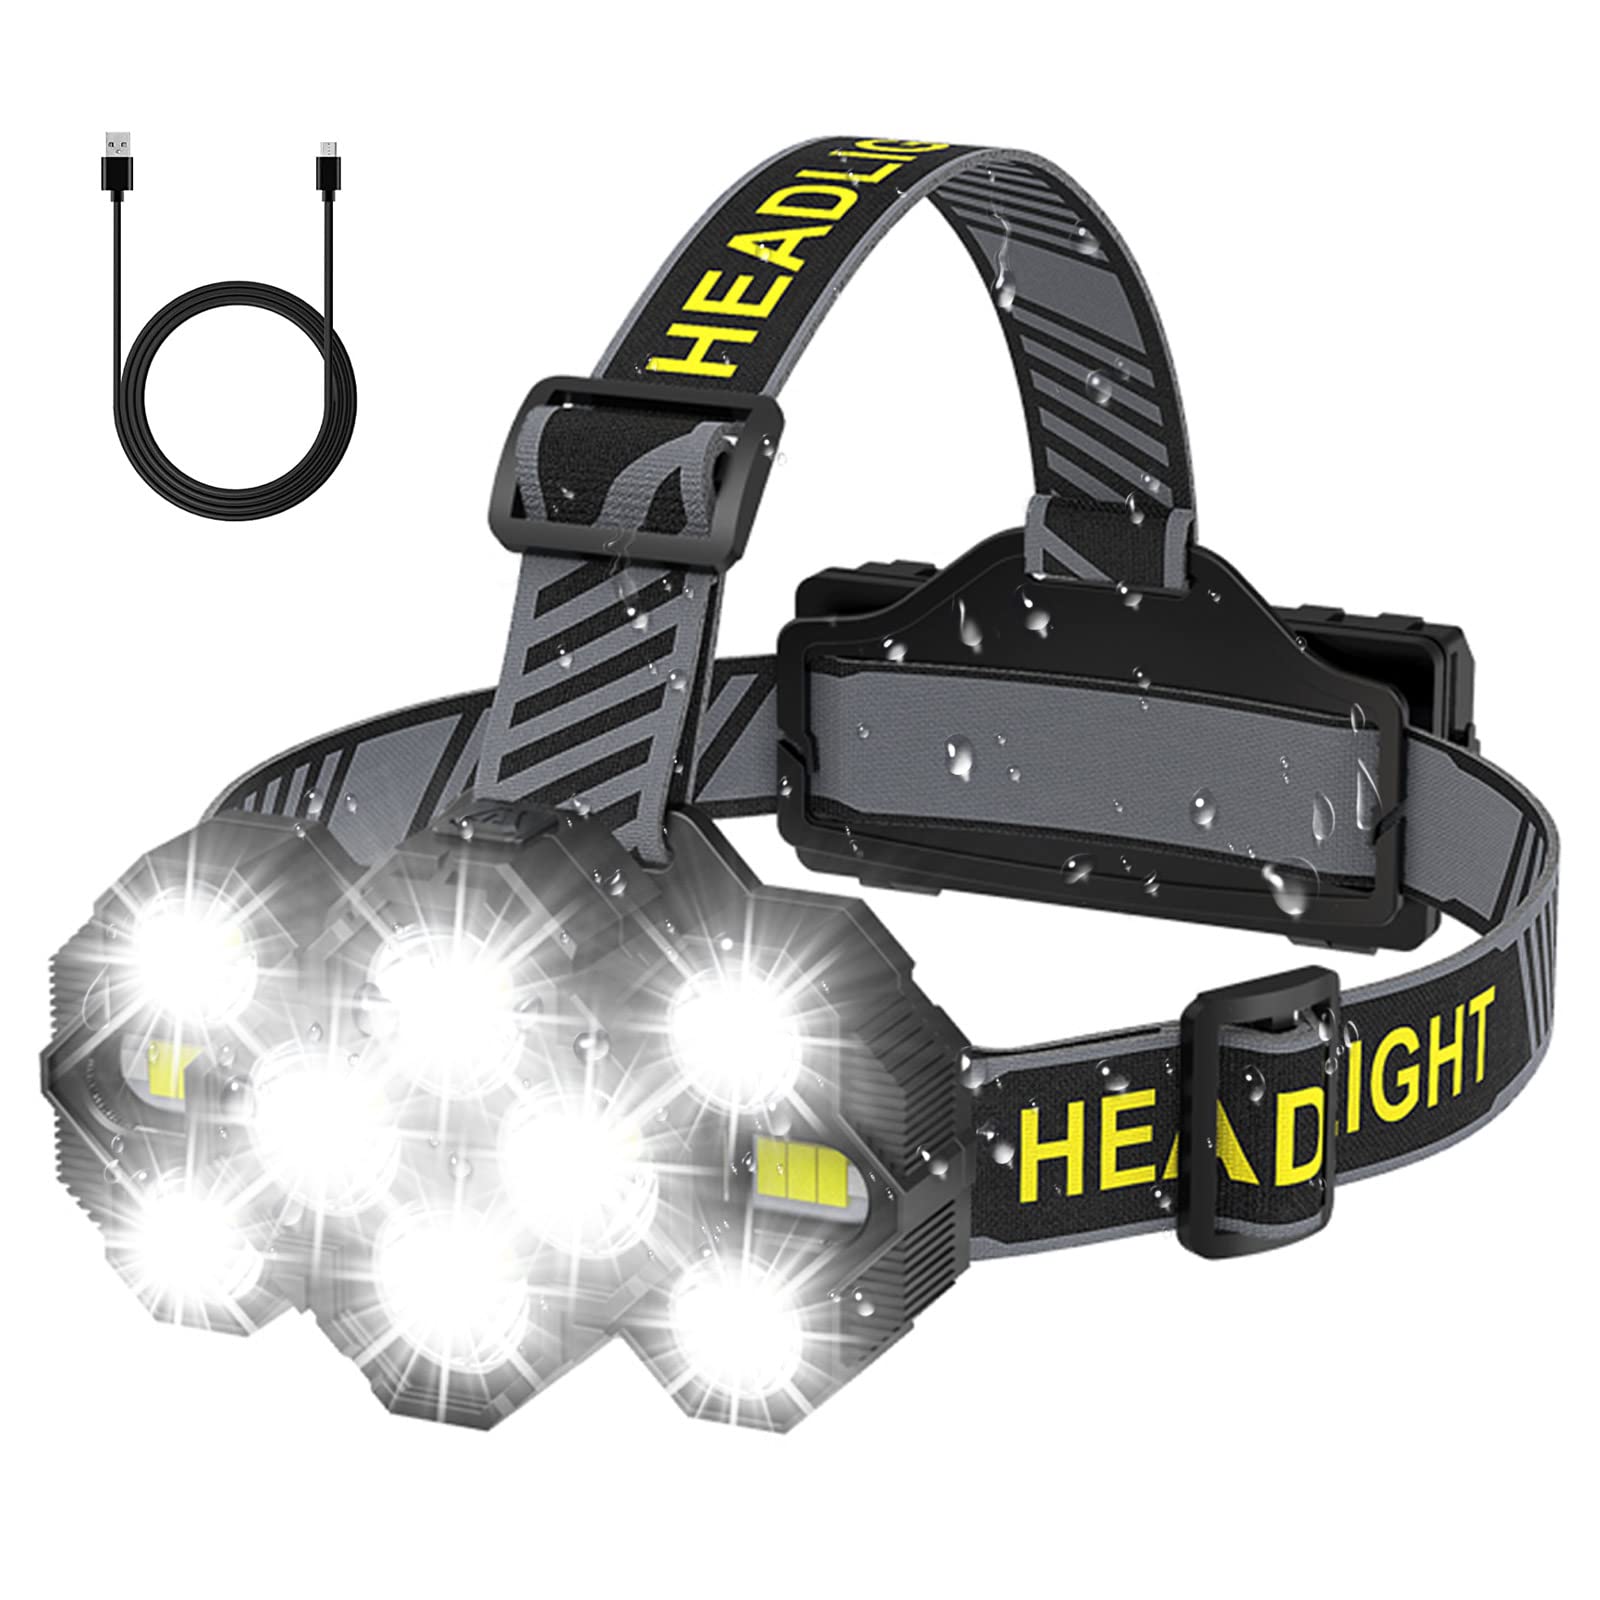 Victoper Headlamp Rechargeable, 22000 Lumen Bright 10 LEDs Head Lamp, 8+2 Modes Head Light with Red Light for Adult, Waterproof Head Flashlight for Outdoor Running, Hunting, Camping, Hiking